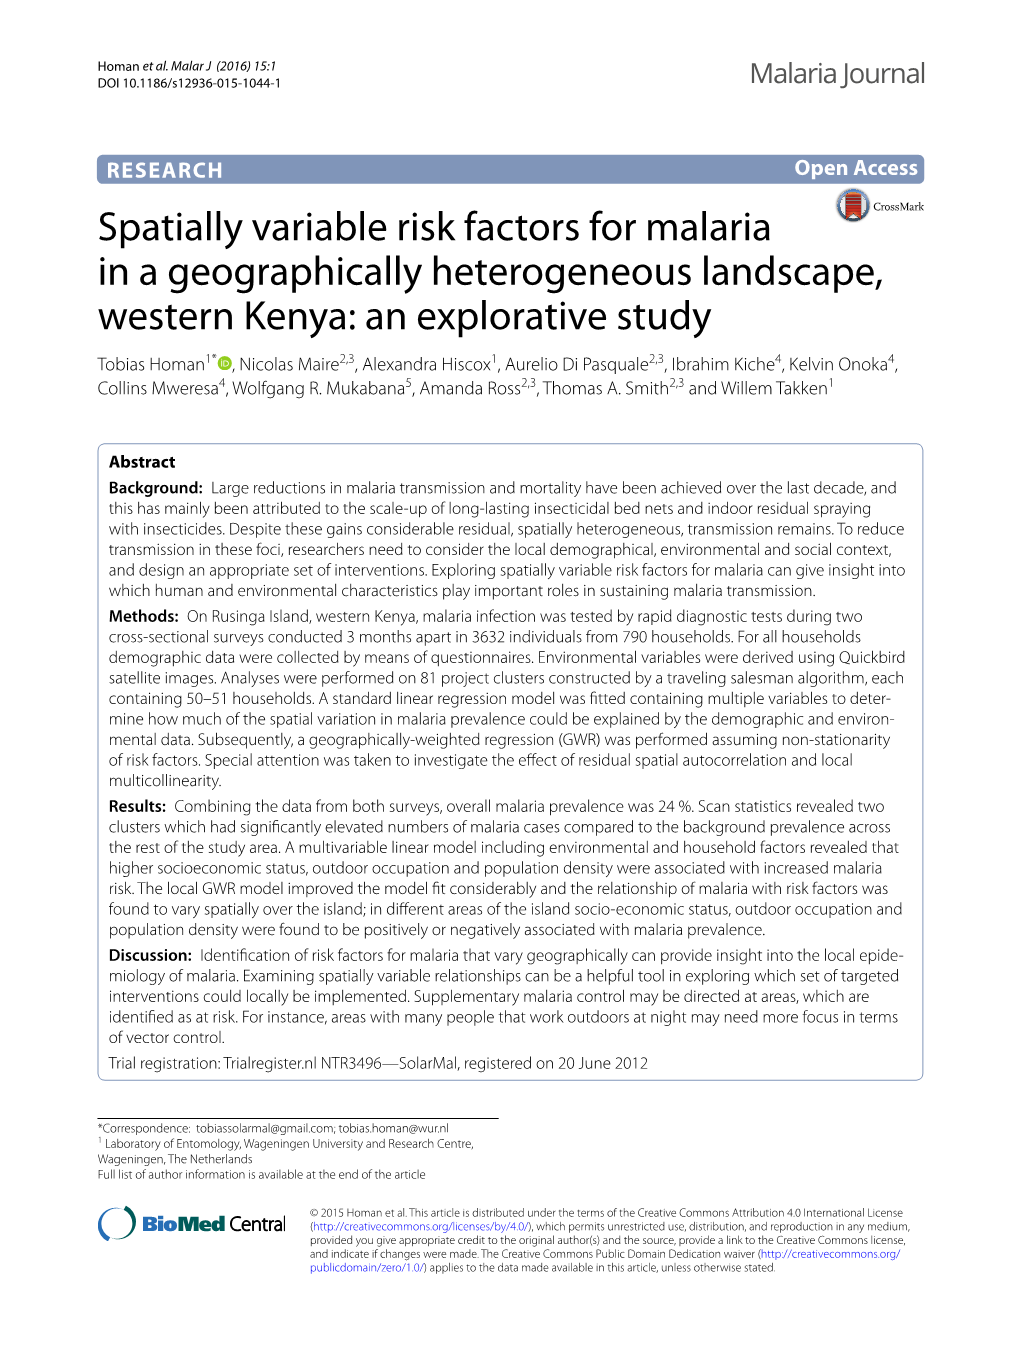 Spatially Variable Risk Factors for Malaria in A